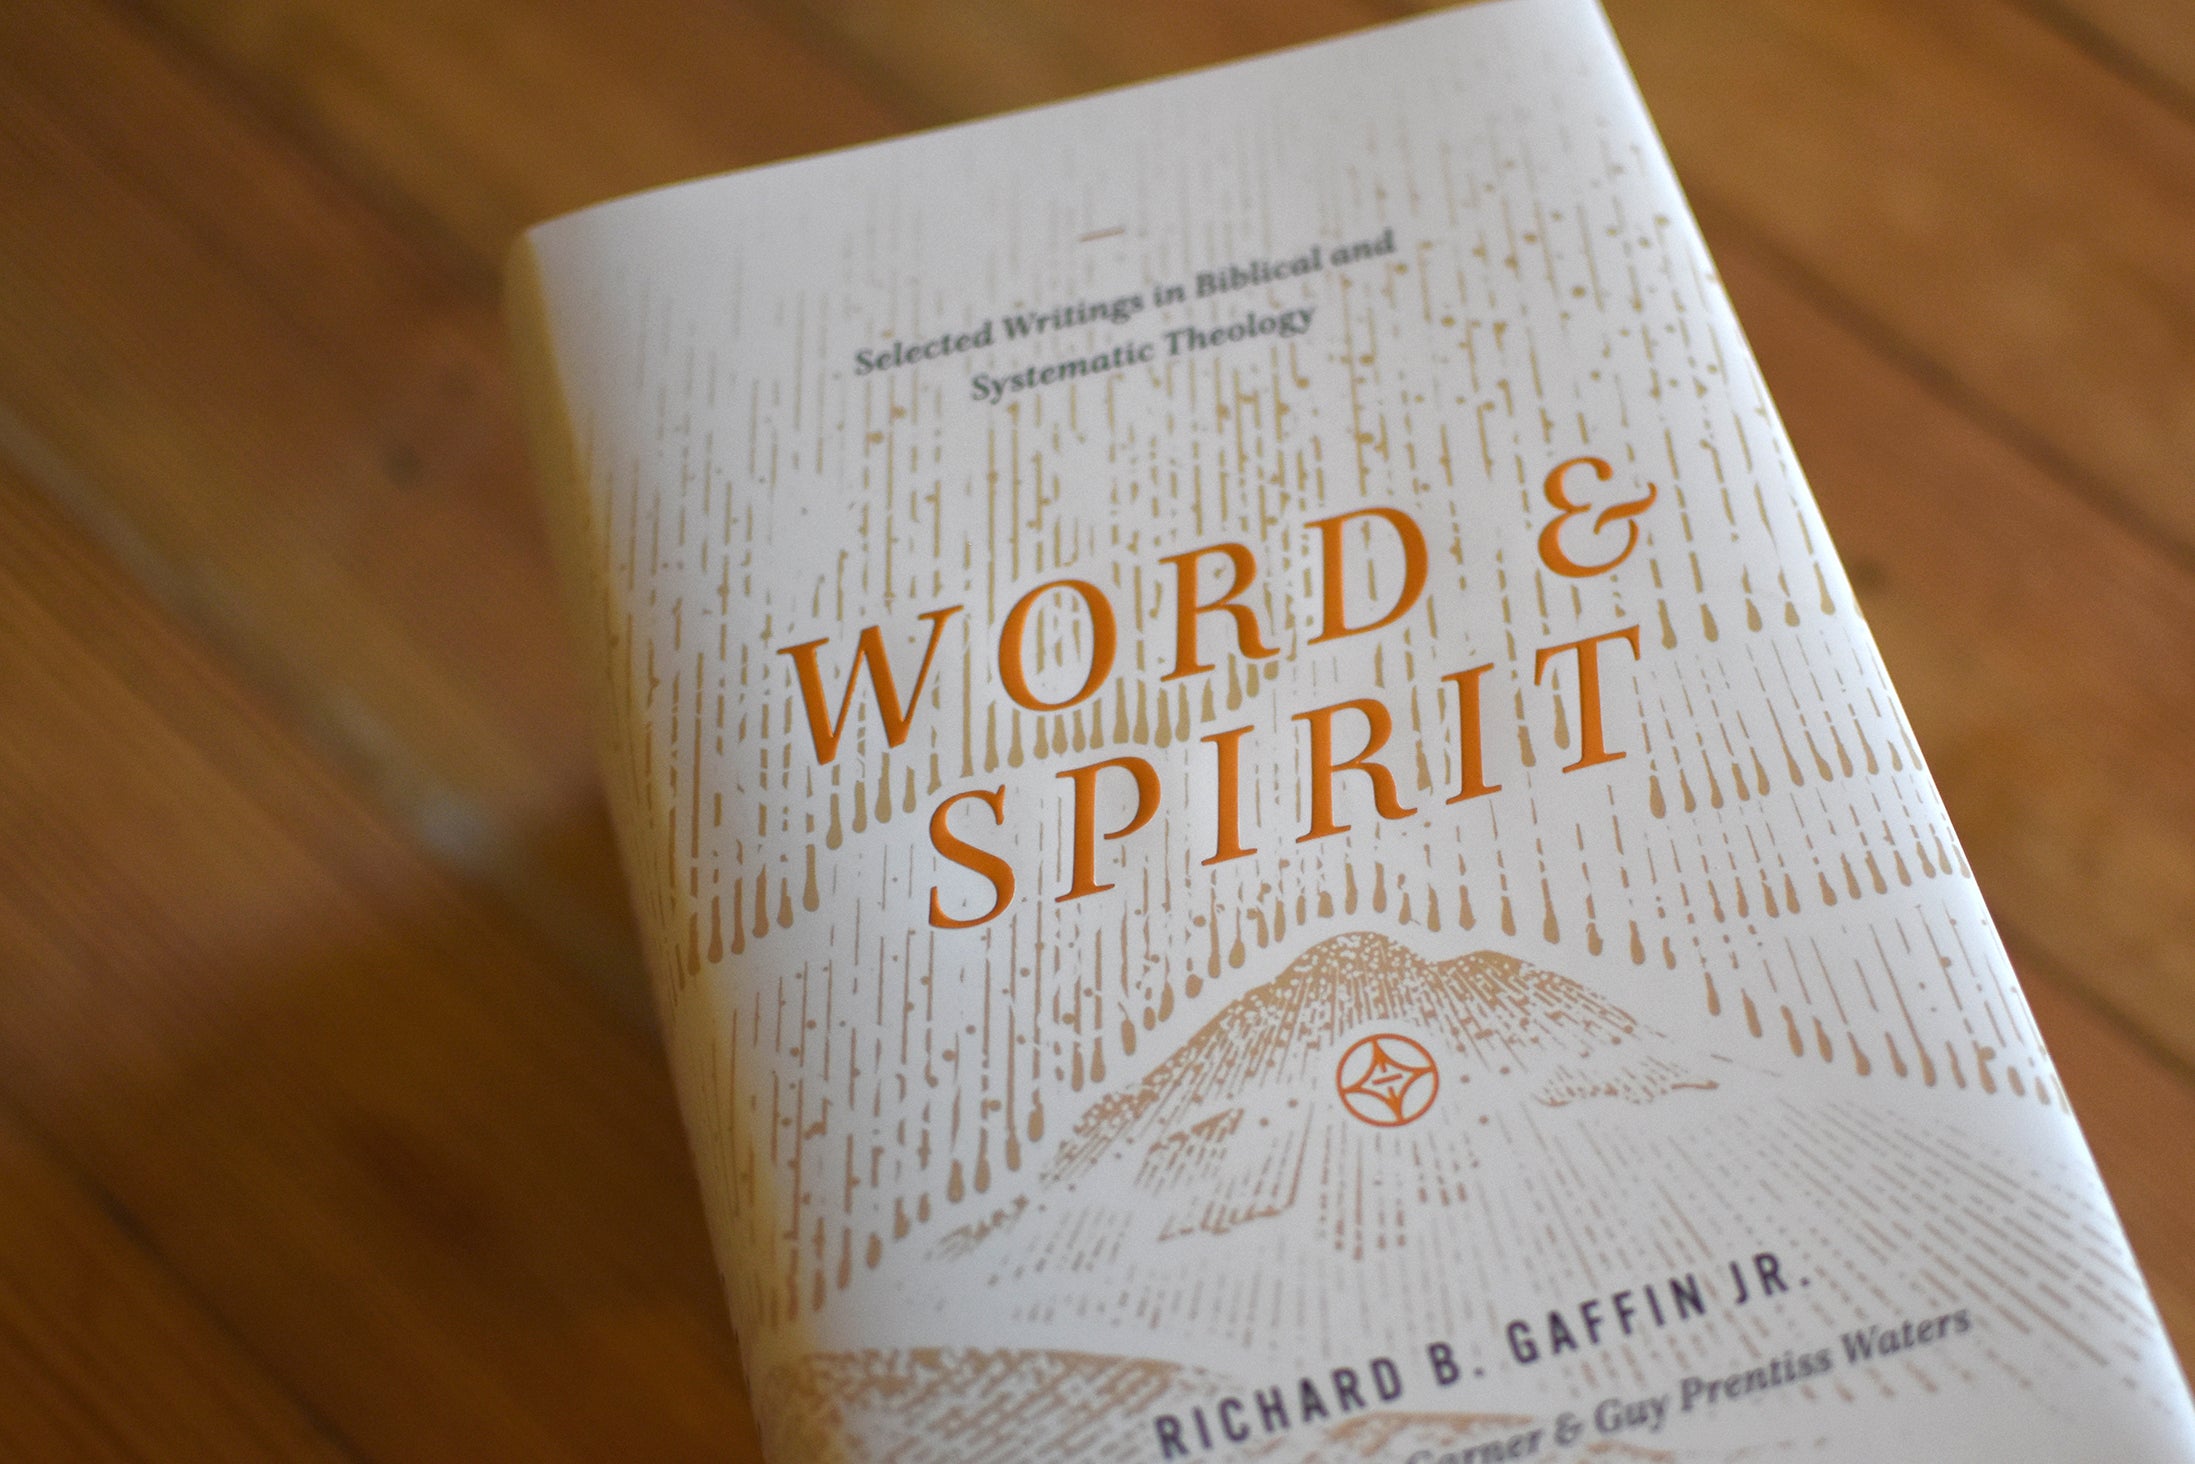 Word and Spirit: Selected Writings in Biblical and Systematic Theology